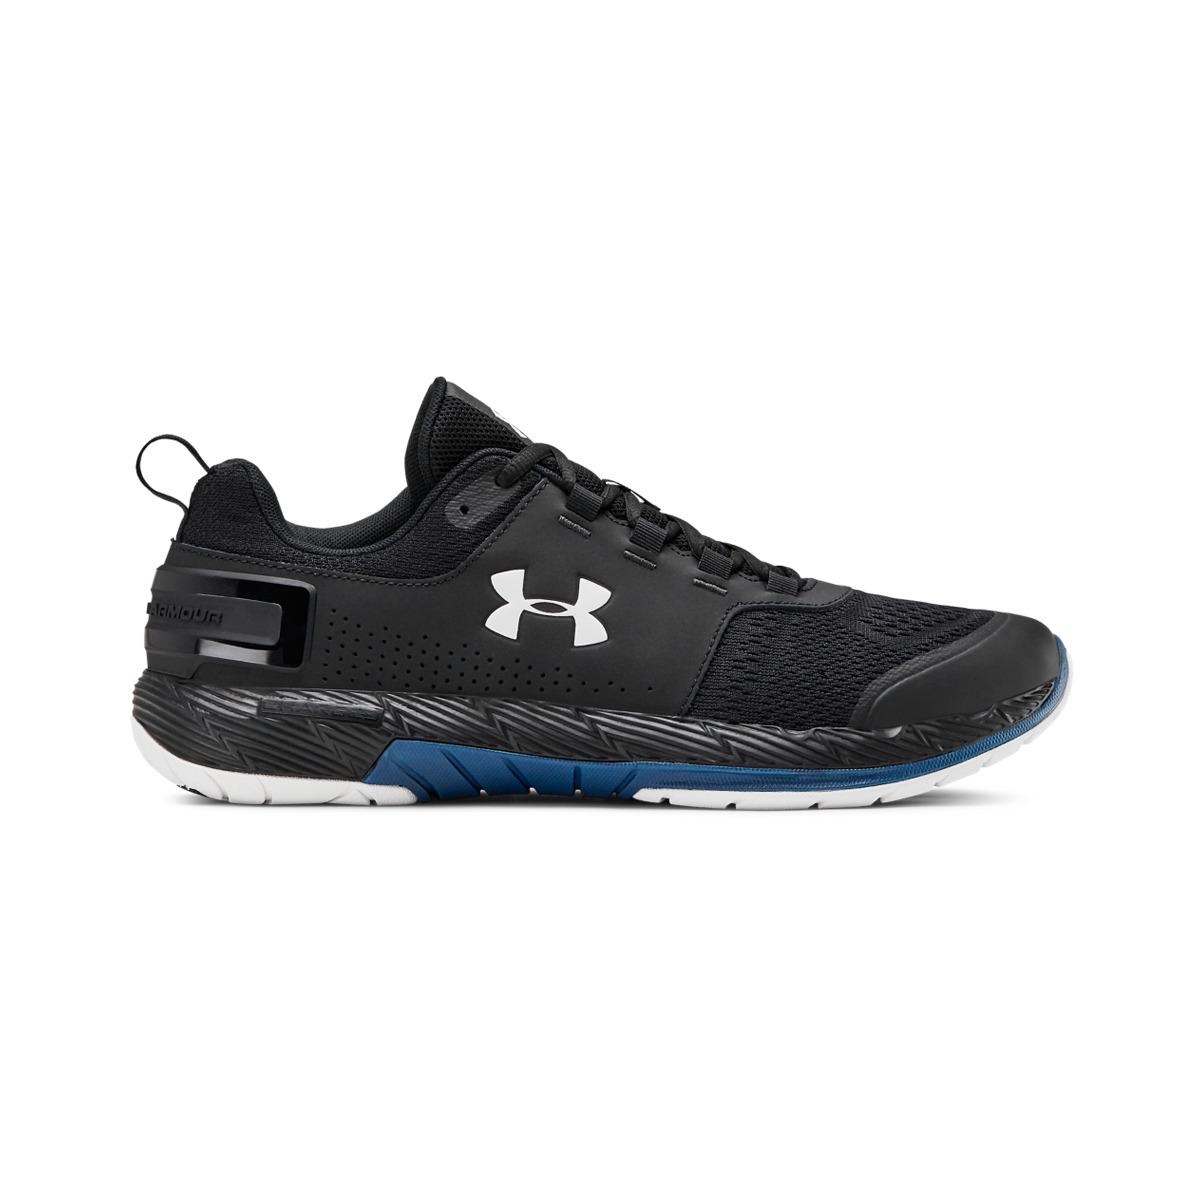 Lyst - Under Armour Commit Tr Ex Fitness/cross Training Shoes in Black ...